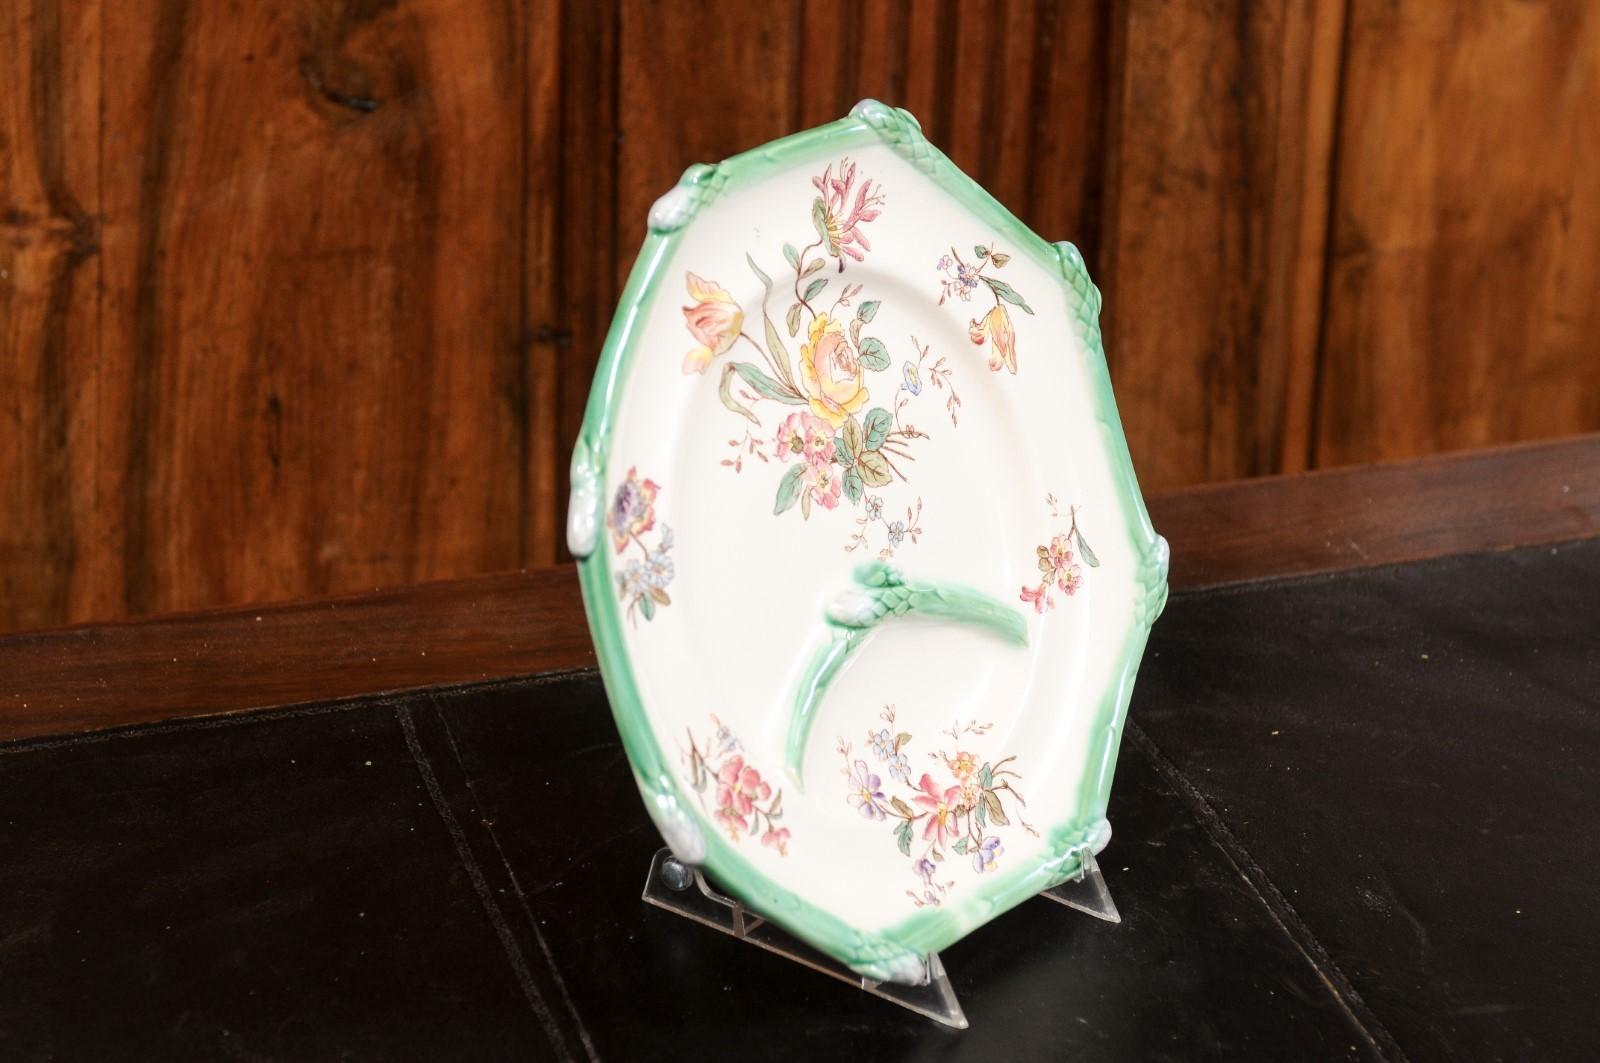 A French majolica asparagus serving plate from the 19th century, with floral décor. Created in France during the 19th century, this majolica plate features an octagonal body framed with green asparagus. A delicate décor, made of a variety of flowers